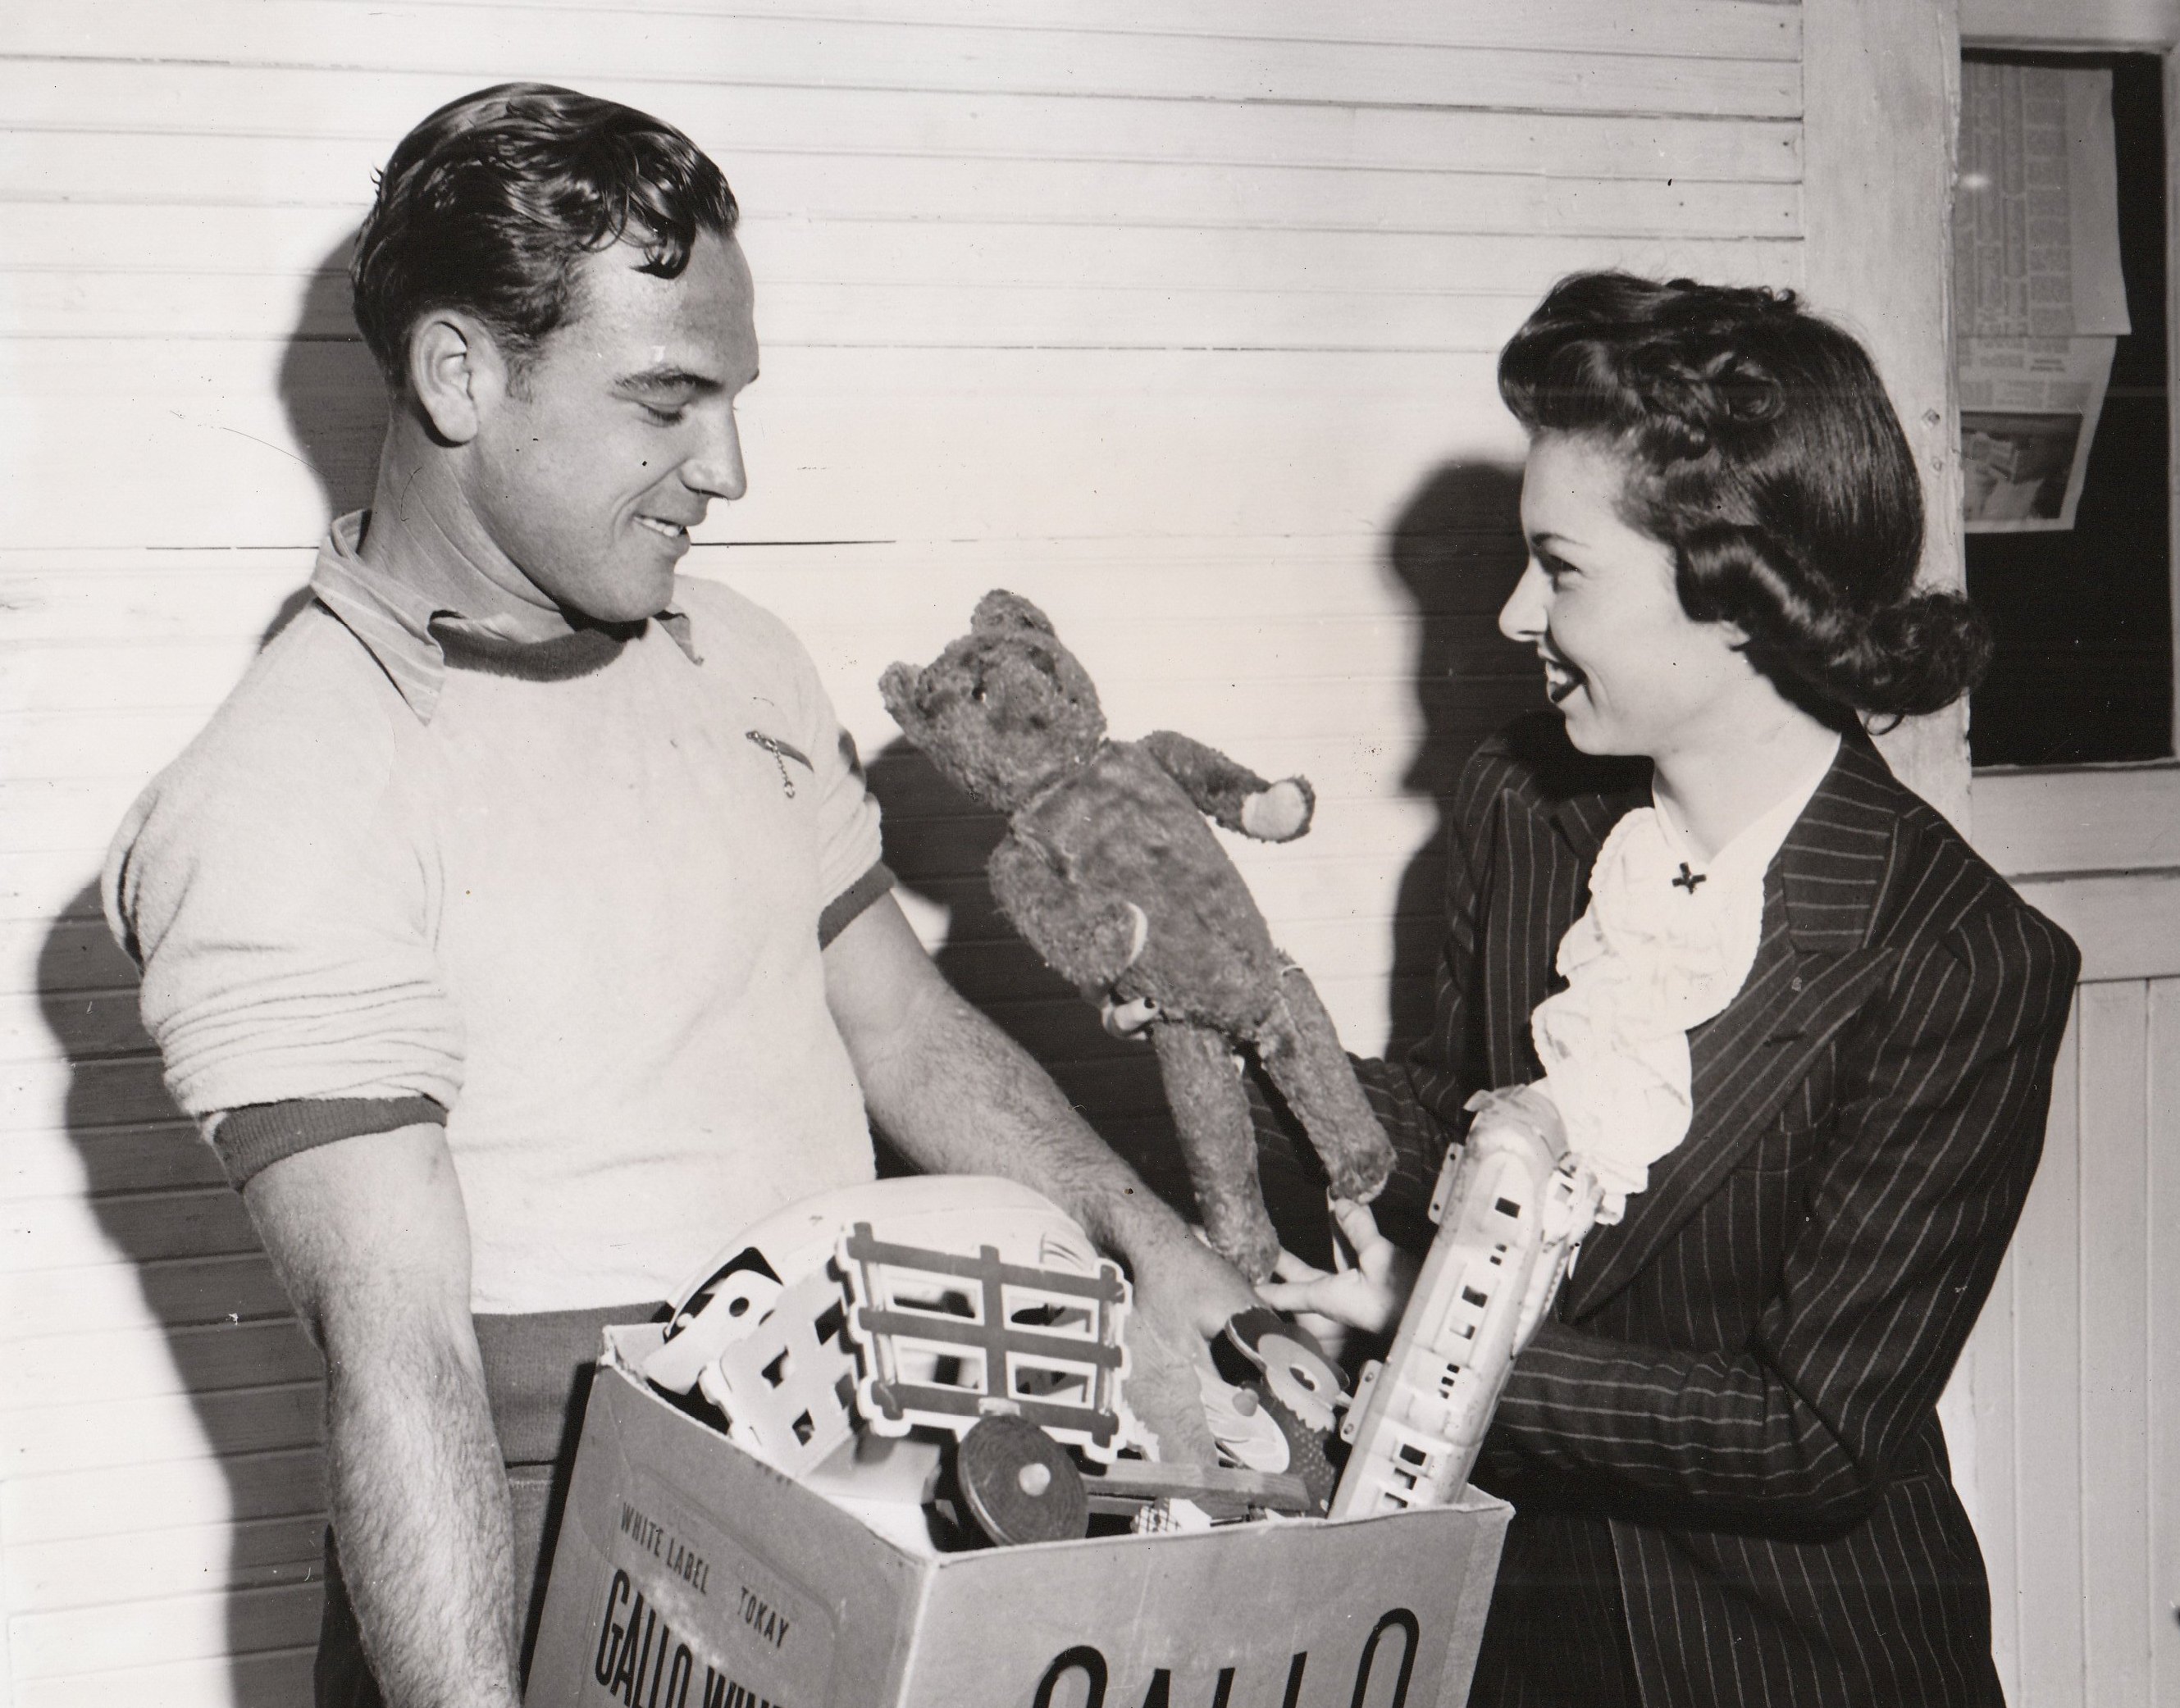 NYA workers Ray Schakel and Mary Weissker prepare to recondition and distribute donated toys to underprivileged children in Long Beach, California. Photo courtesy of the National Archives (ca. 1935-1943).